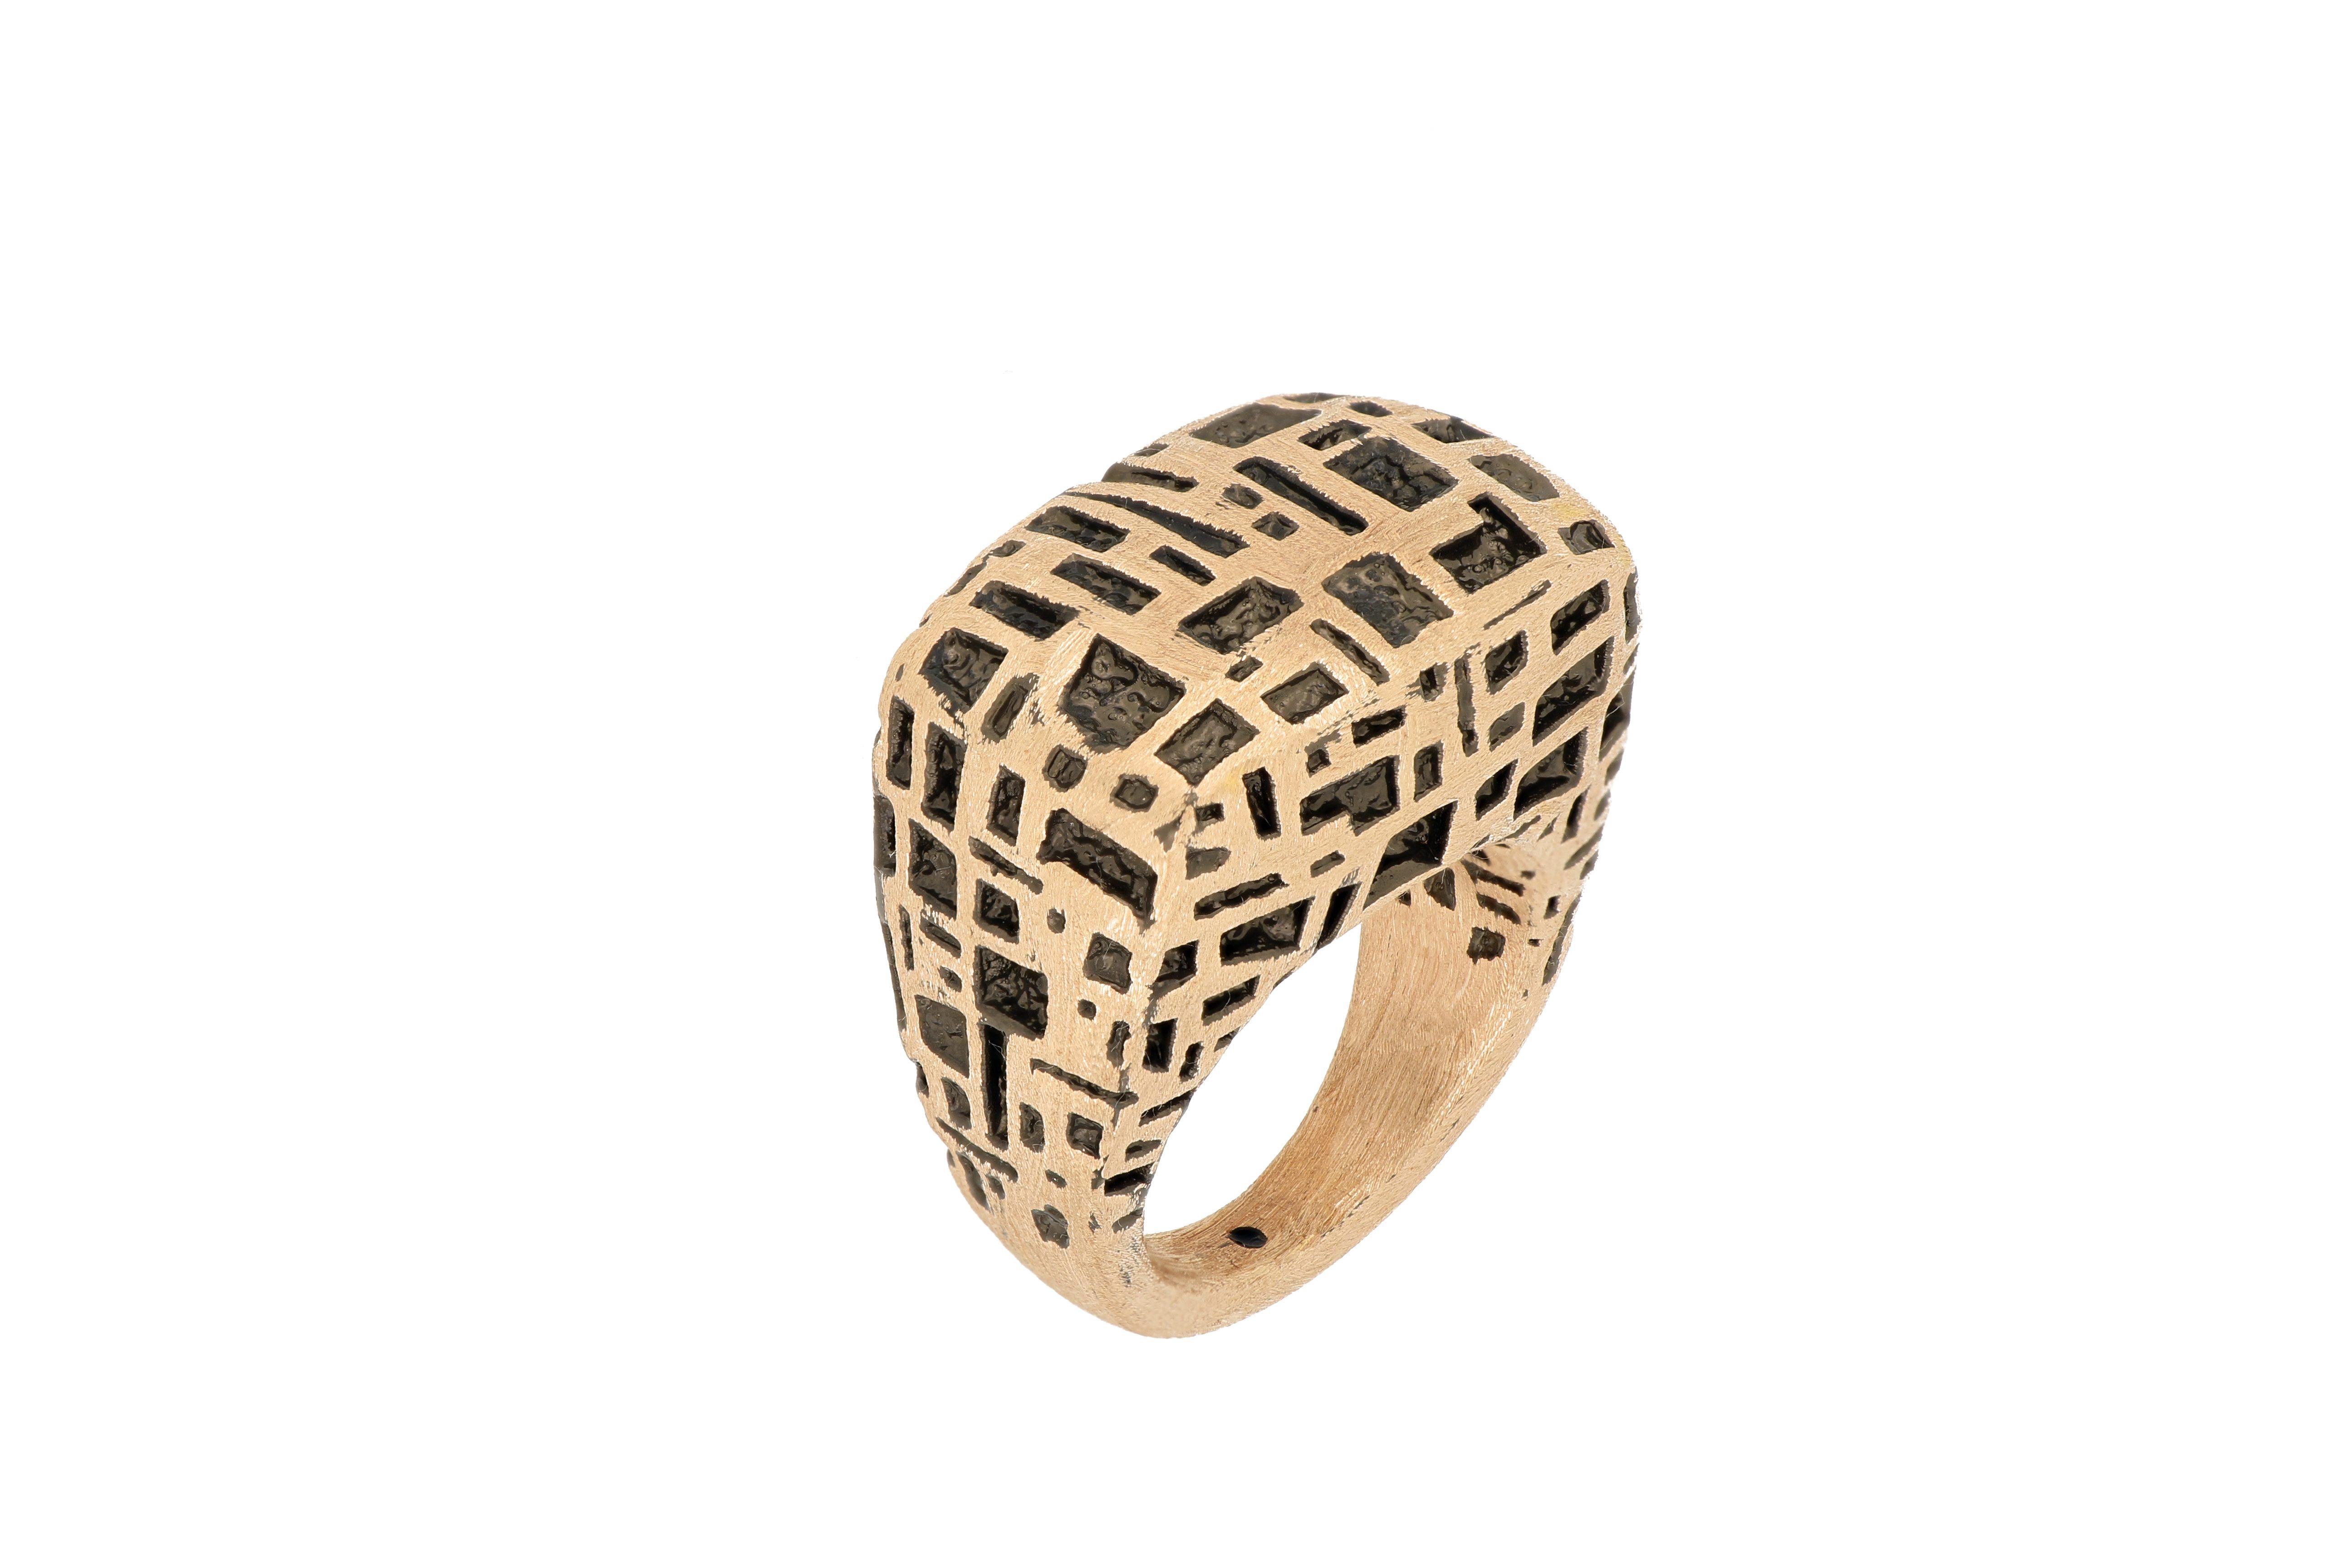 18 karat rose gold cocktail ring, designed in Italy. The ring is beautifully made with bold and interesting pattern, very stylish with square shank.
The brand  is renowned for its high jewellery collections with fabulous designs. Our designs reflect